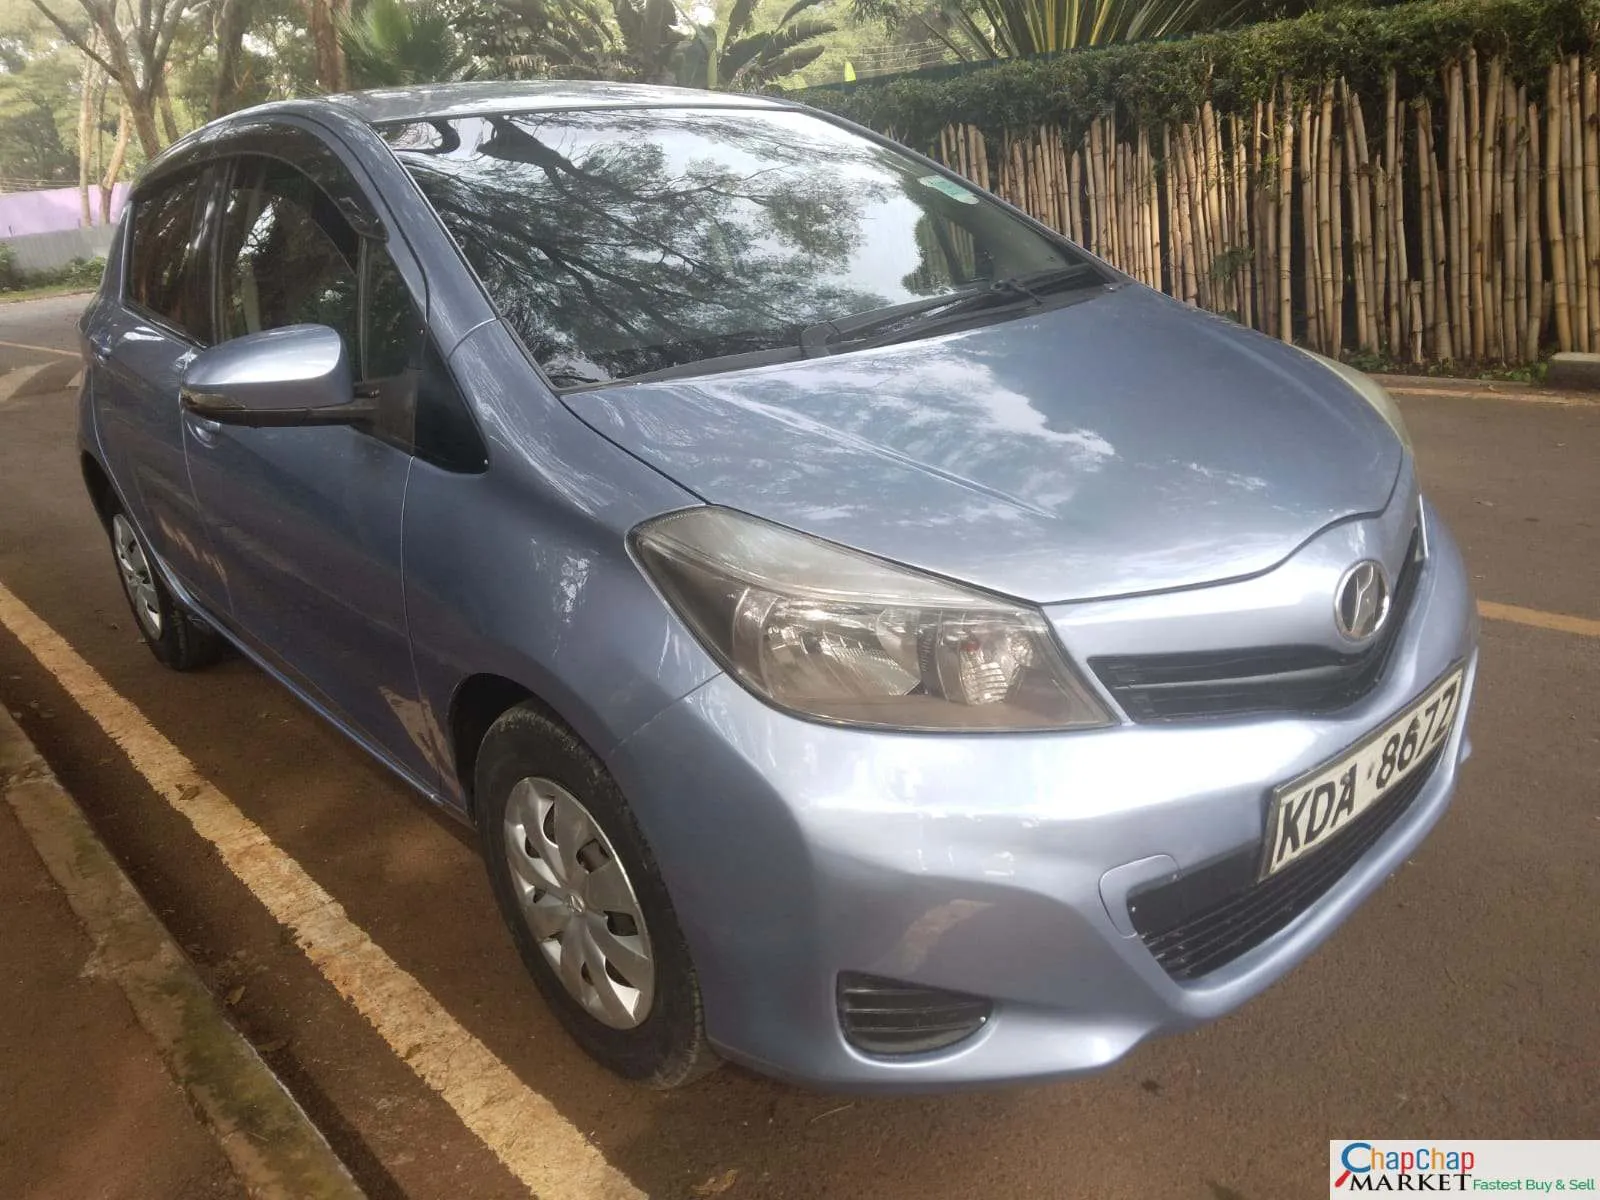 Cars Cars For Sale/Vehicles-Toyota Vitz 1300cc for sale in Kenya 🔥 You Pay 30% Deposit Trade in OK EXCLUSIVE 7